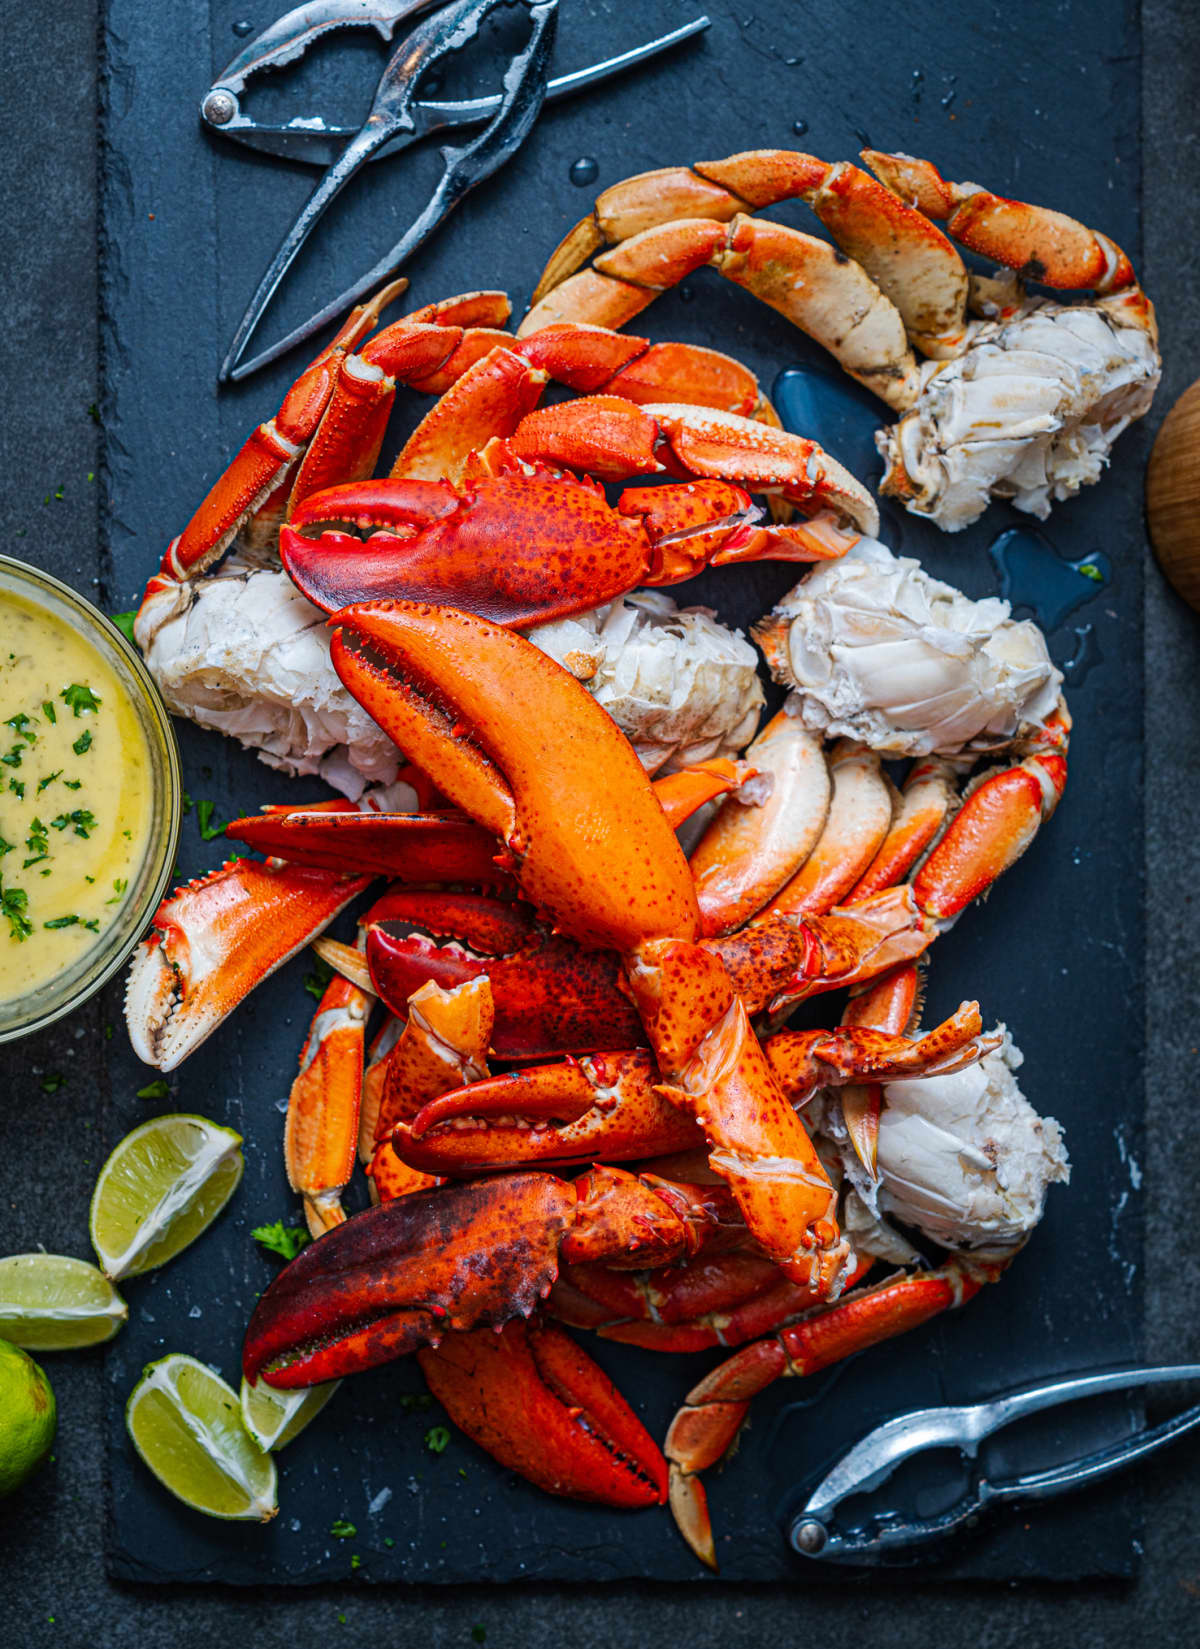 Lobster claws and Dungeness crab legs with lime slices